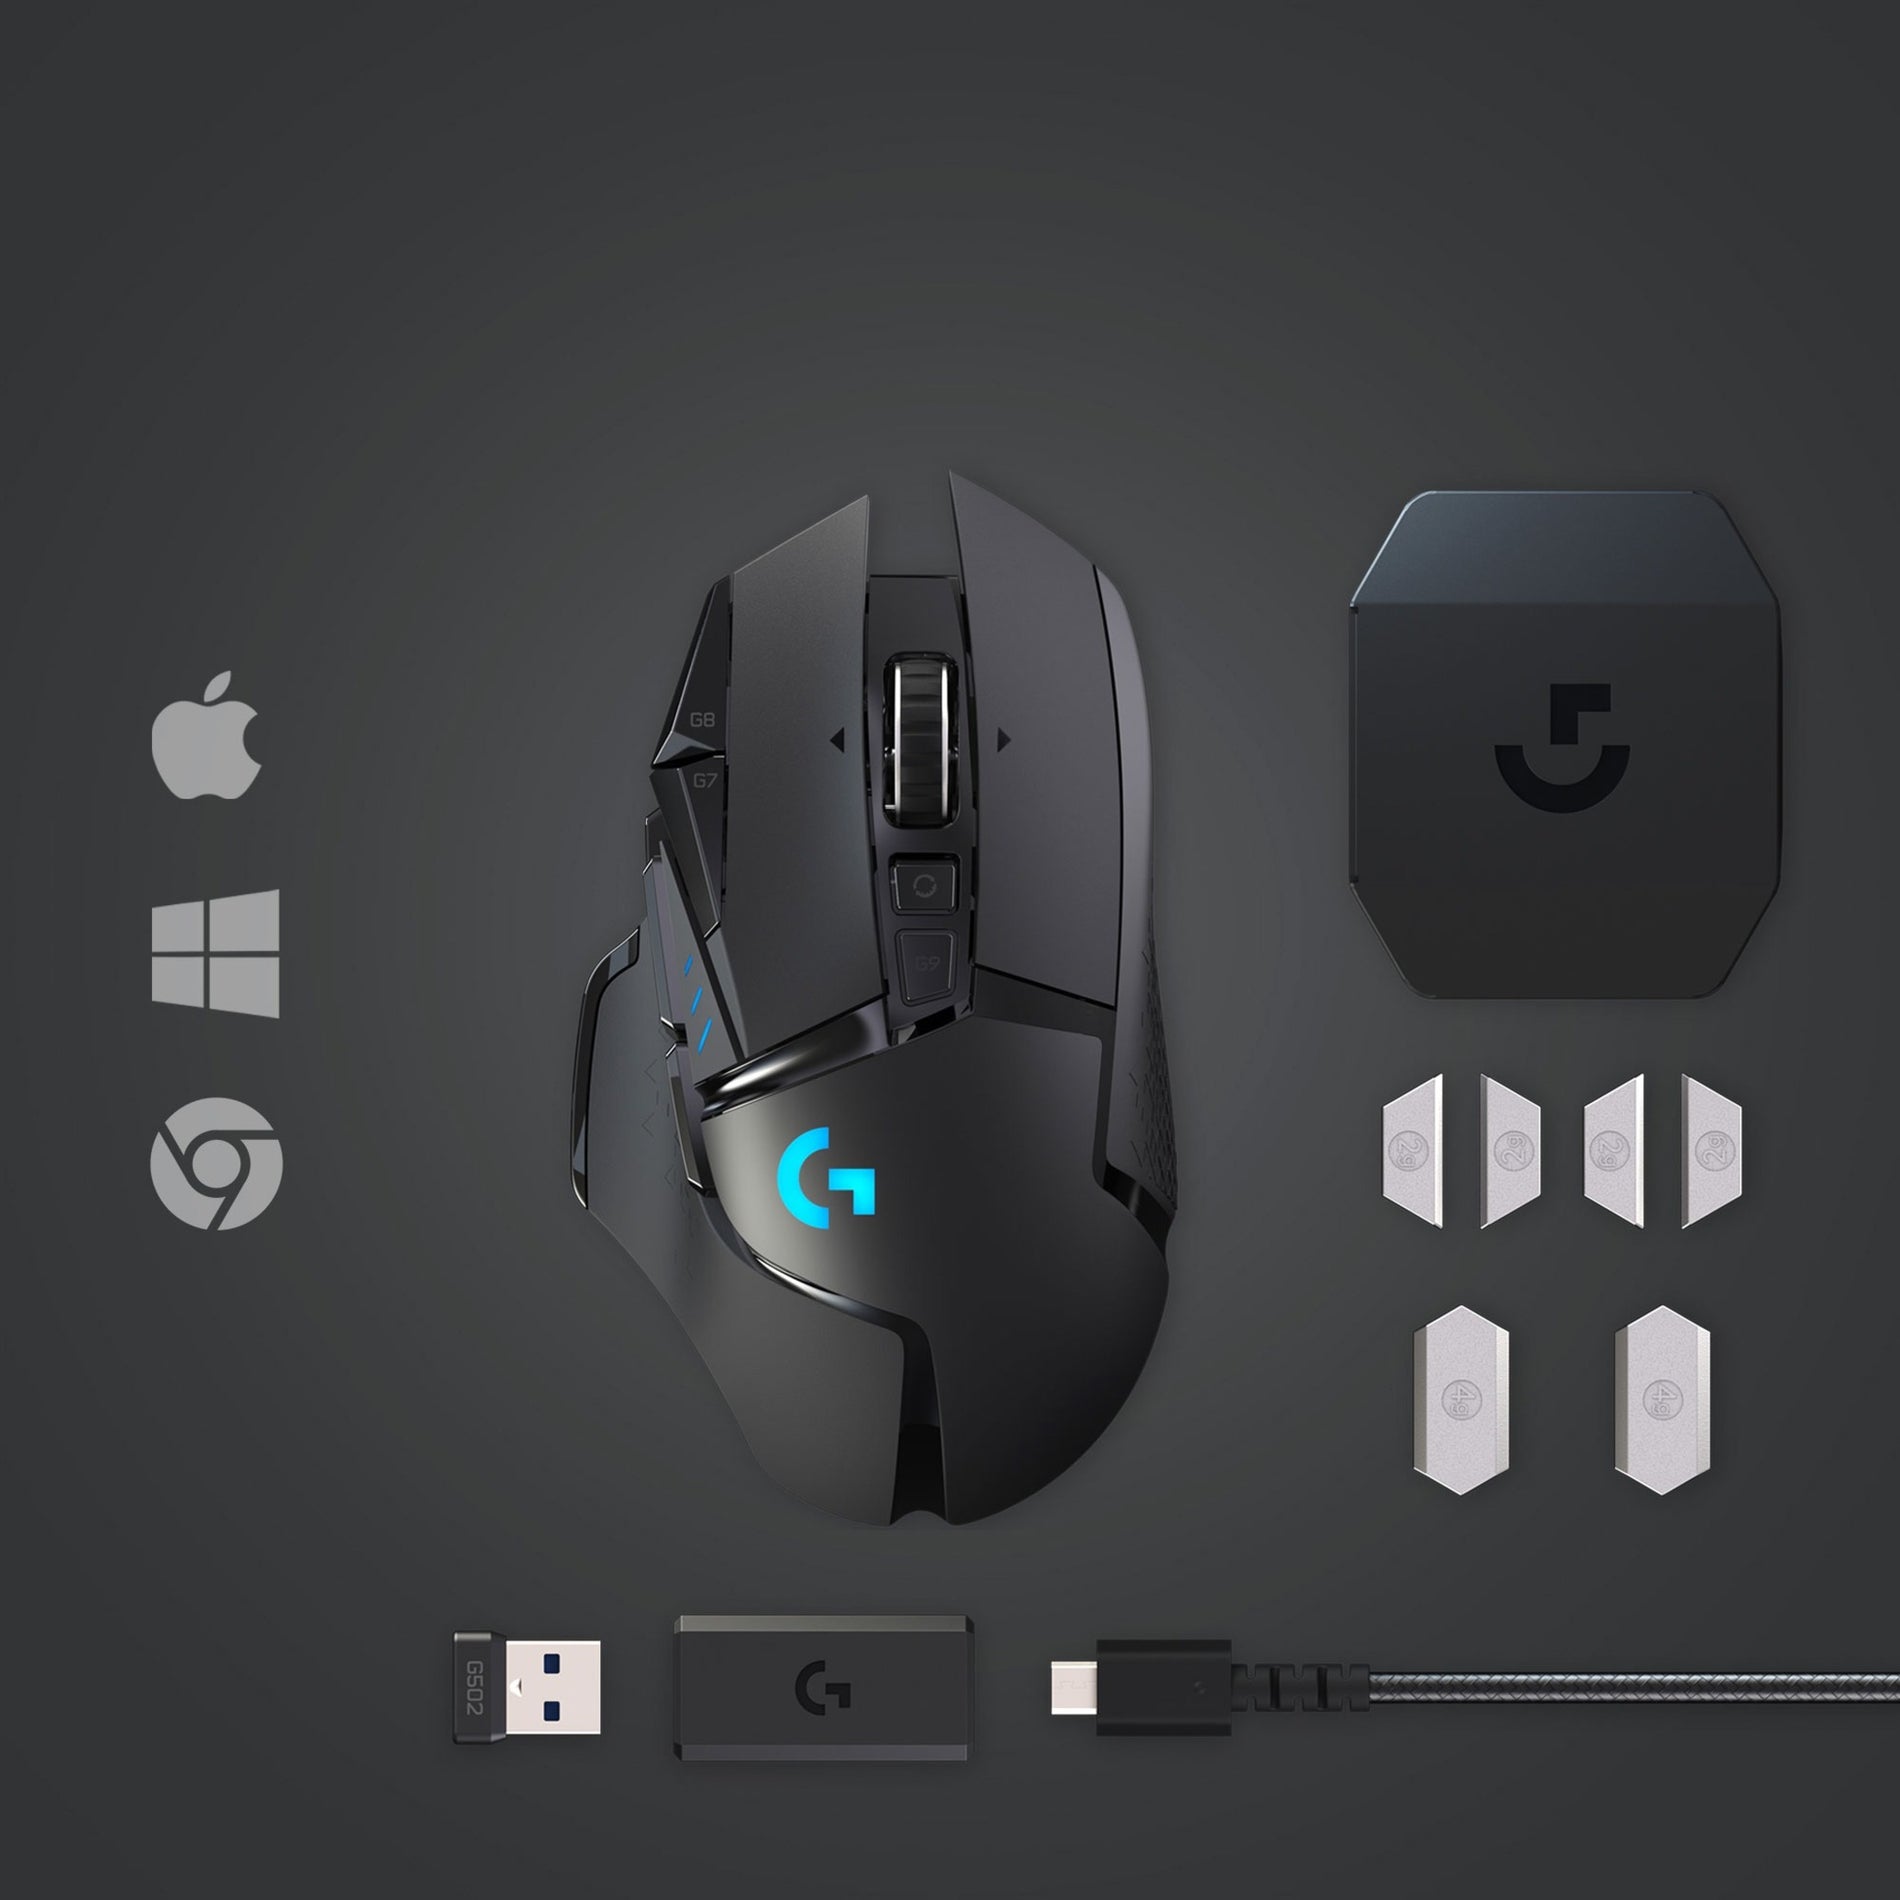 Logitech Launches G502 Lightspeed Mouse: The Classic Mouse Goes Wireless